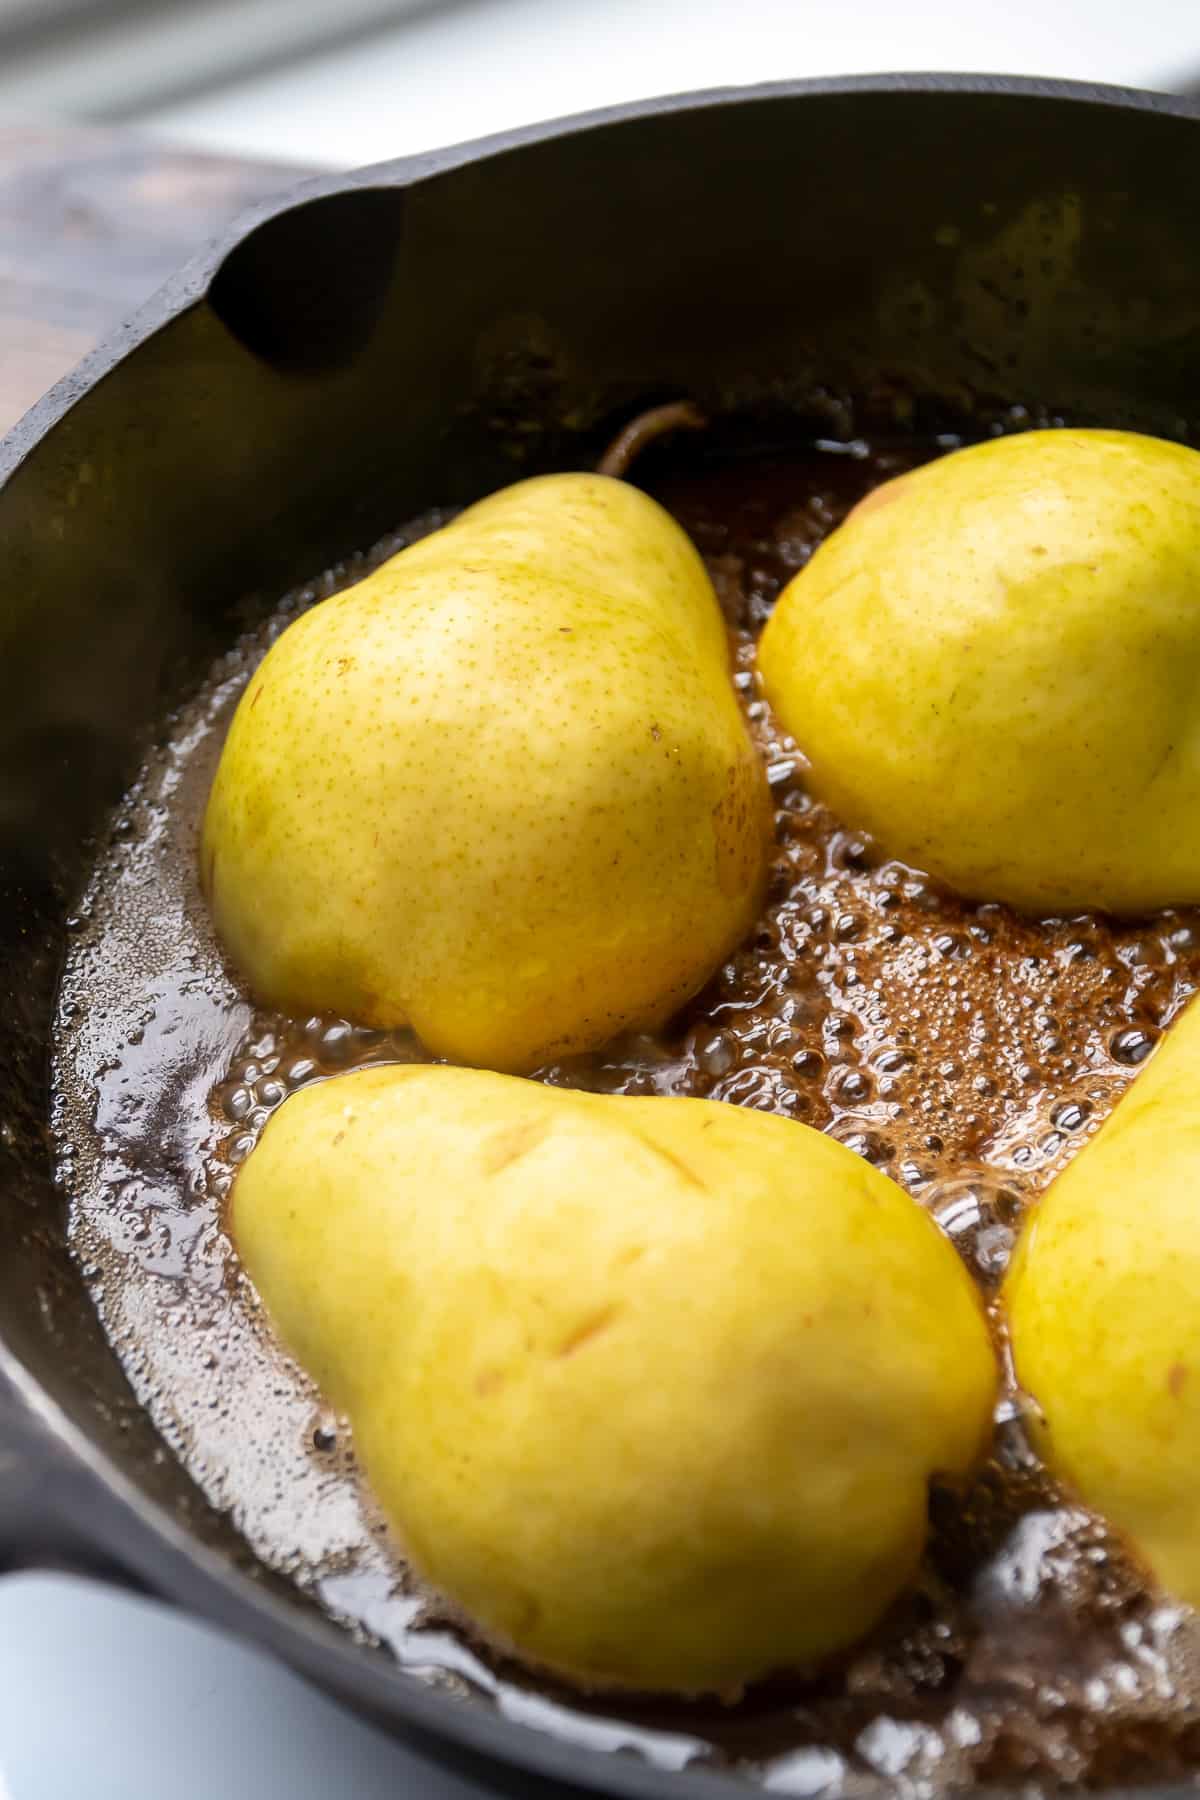 Caramelized pears cooking in a pan.